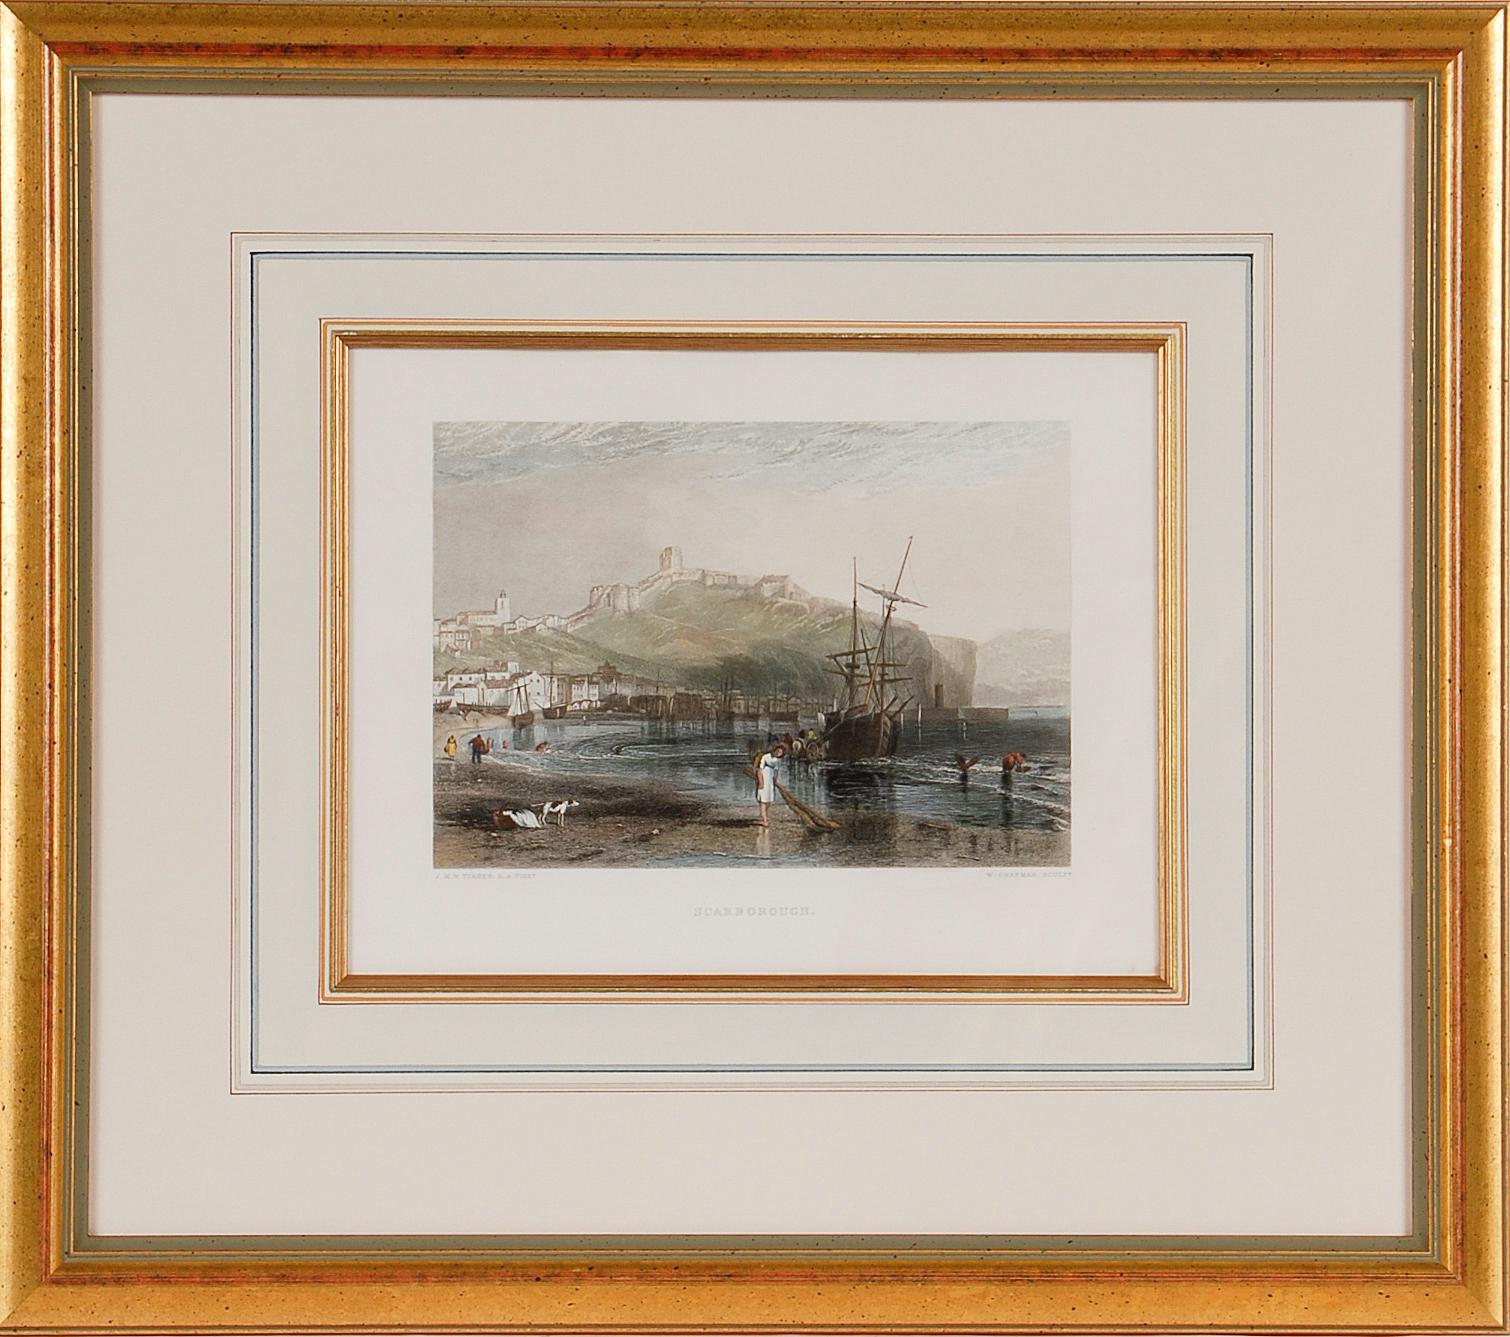 How much is a Turner painting worth?